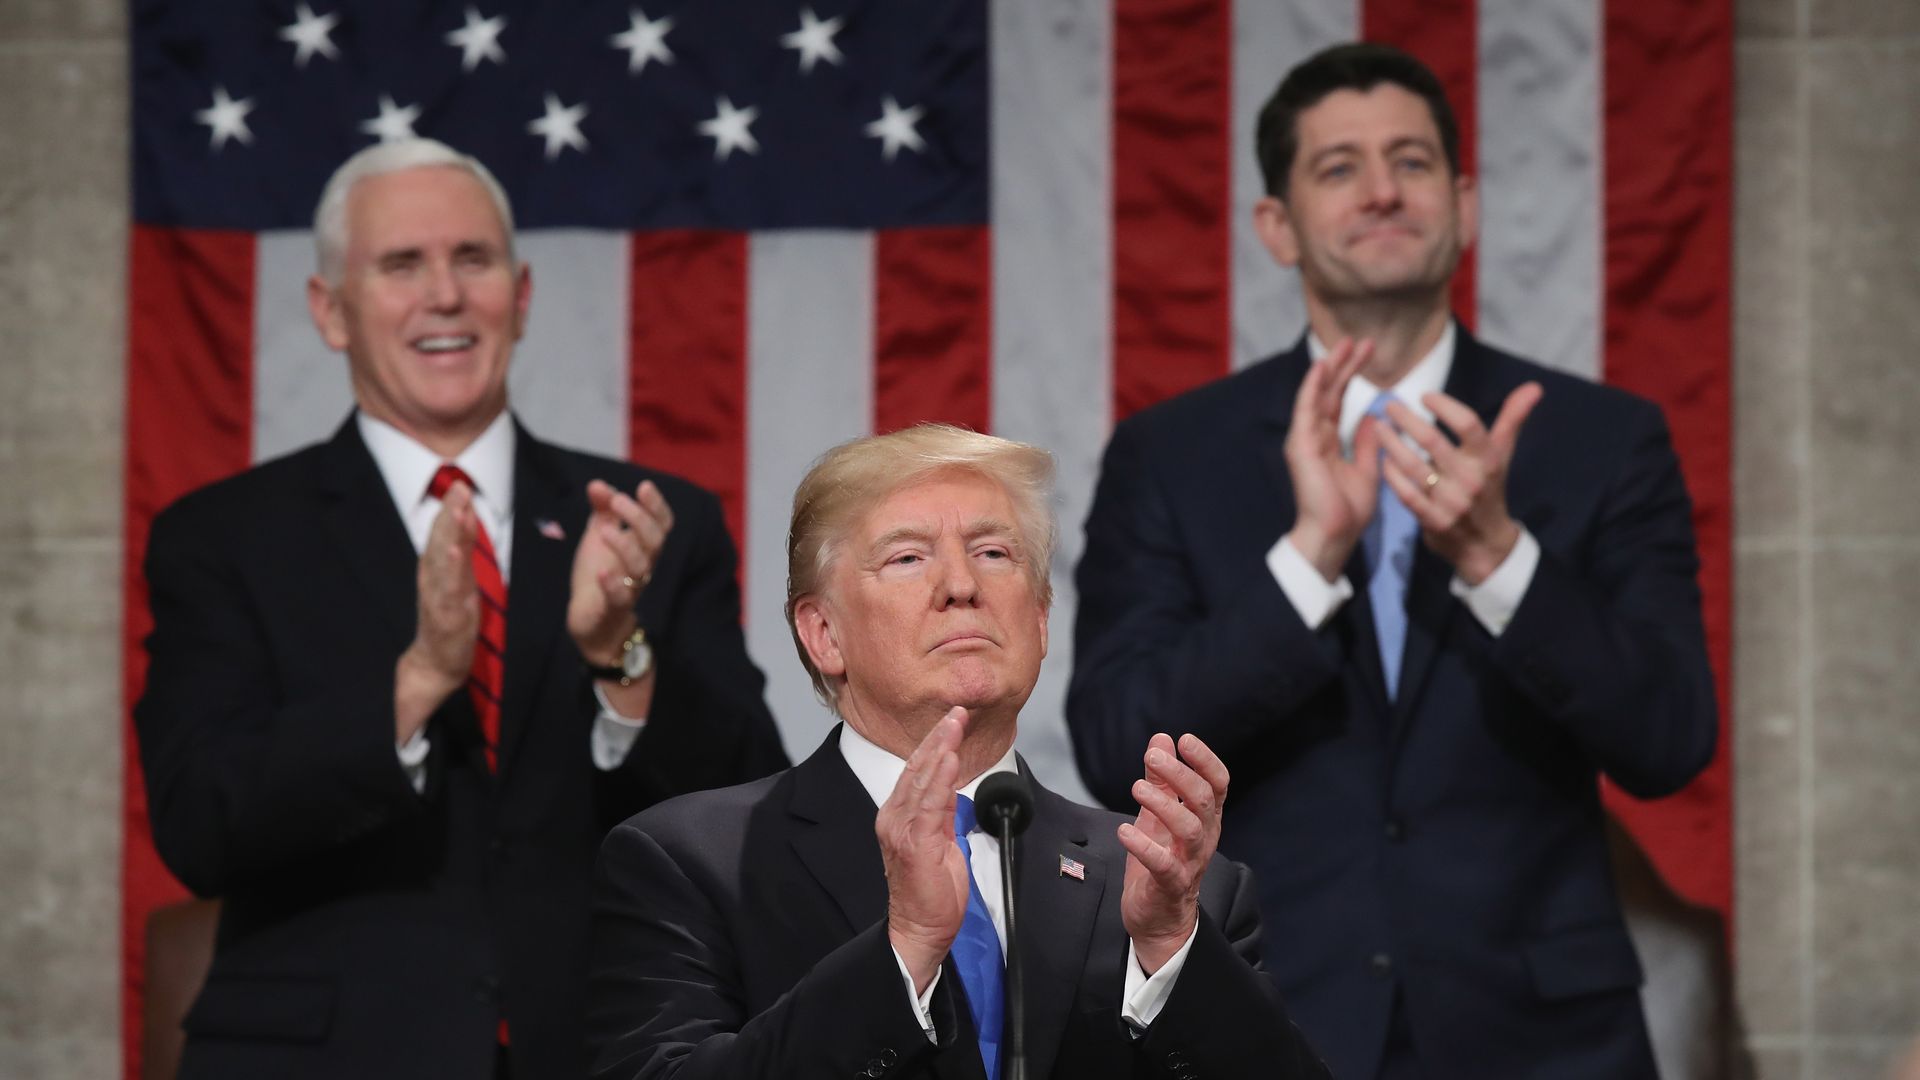 President Trump with Vice President Mike Pence and House Speaker Paul Ryan.